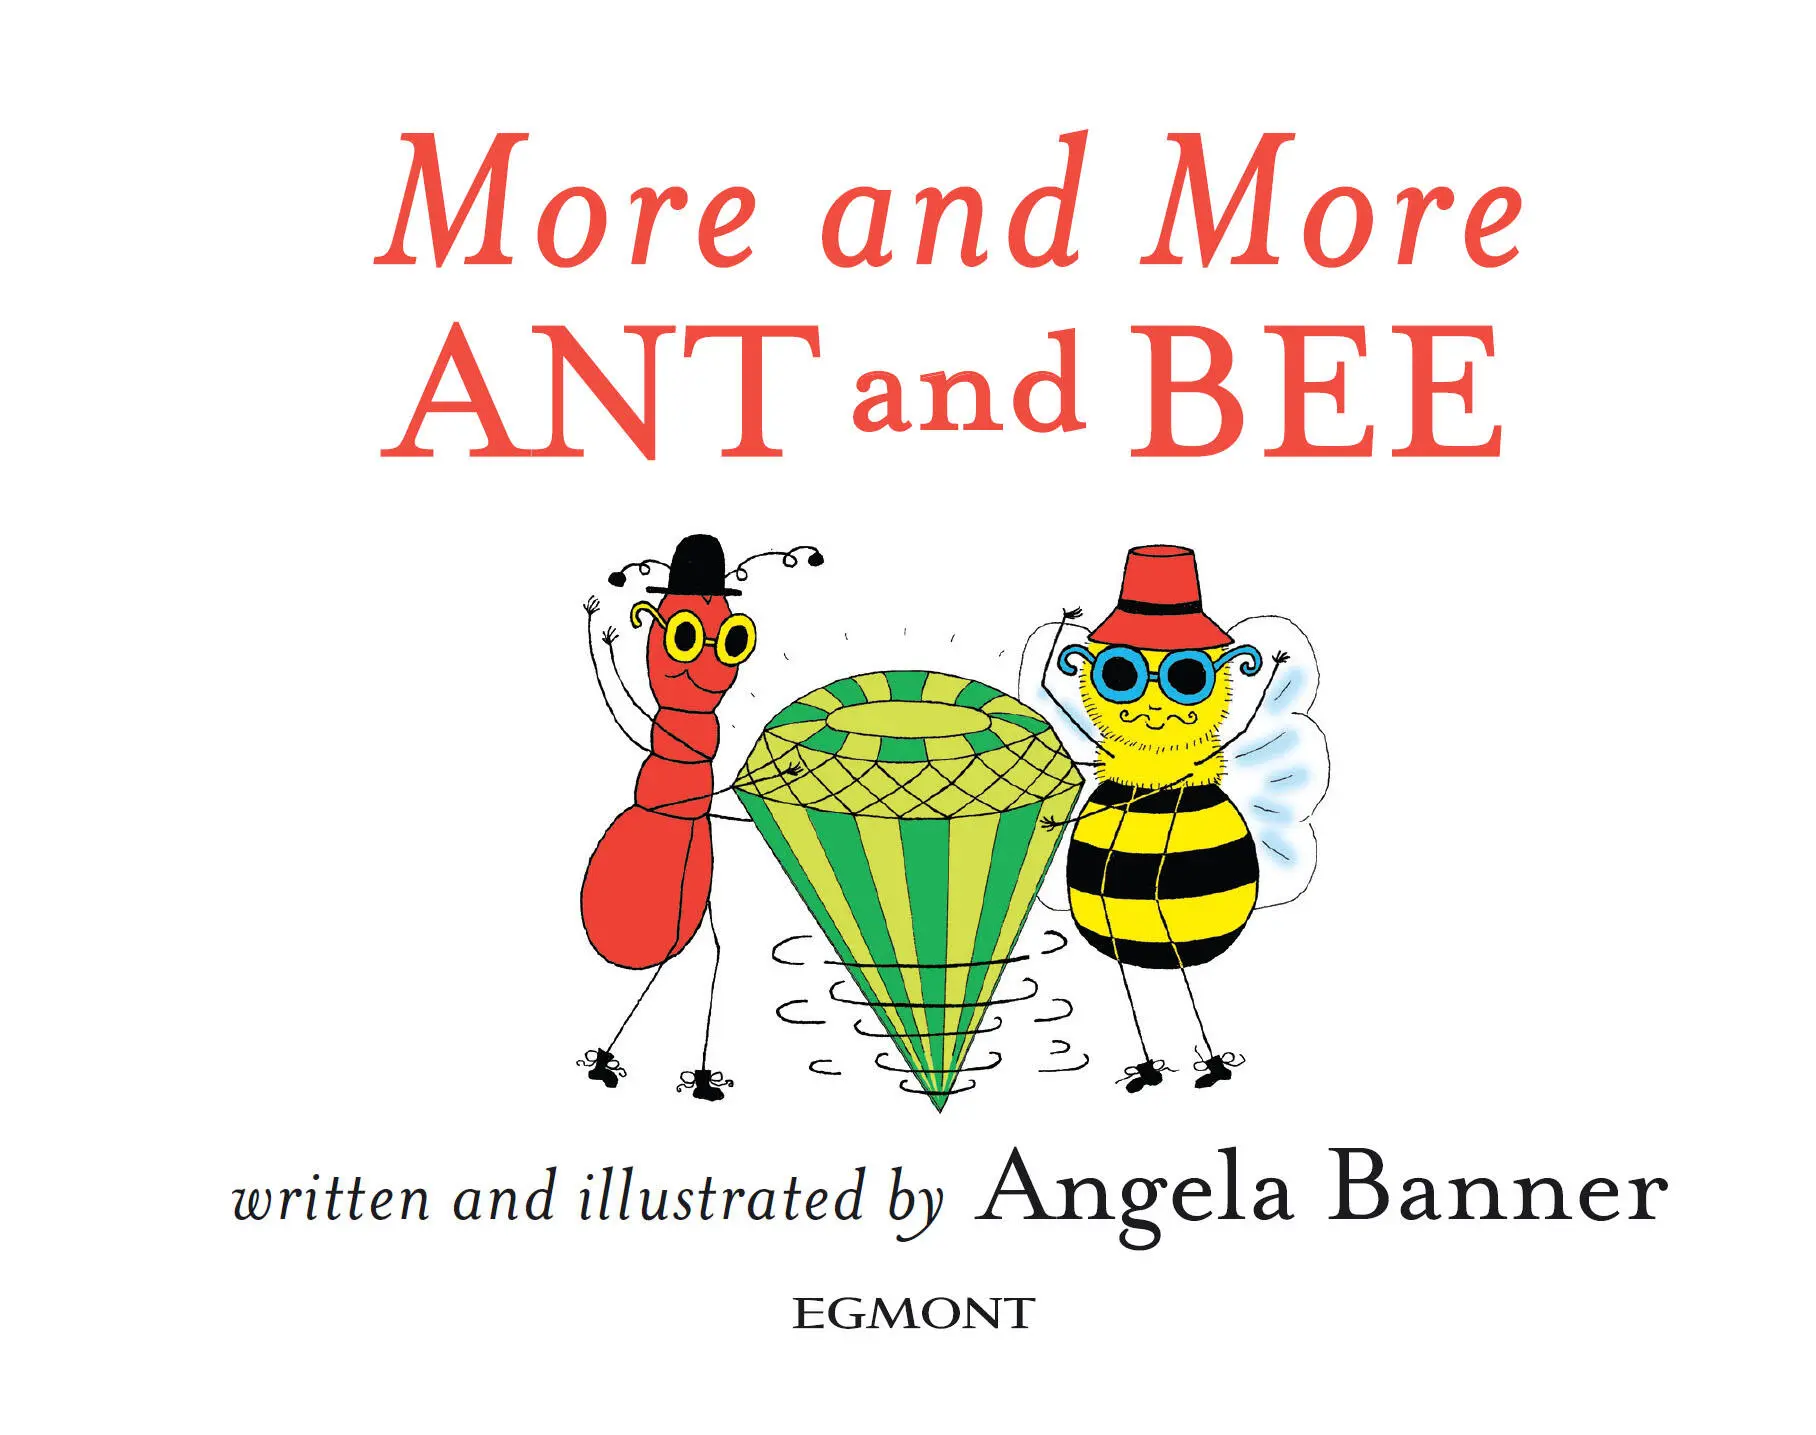 This ANT and BEE book belongs to One - фото 2